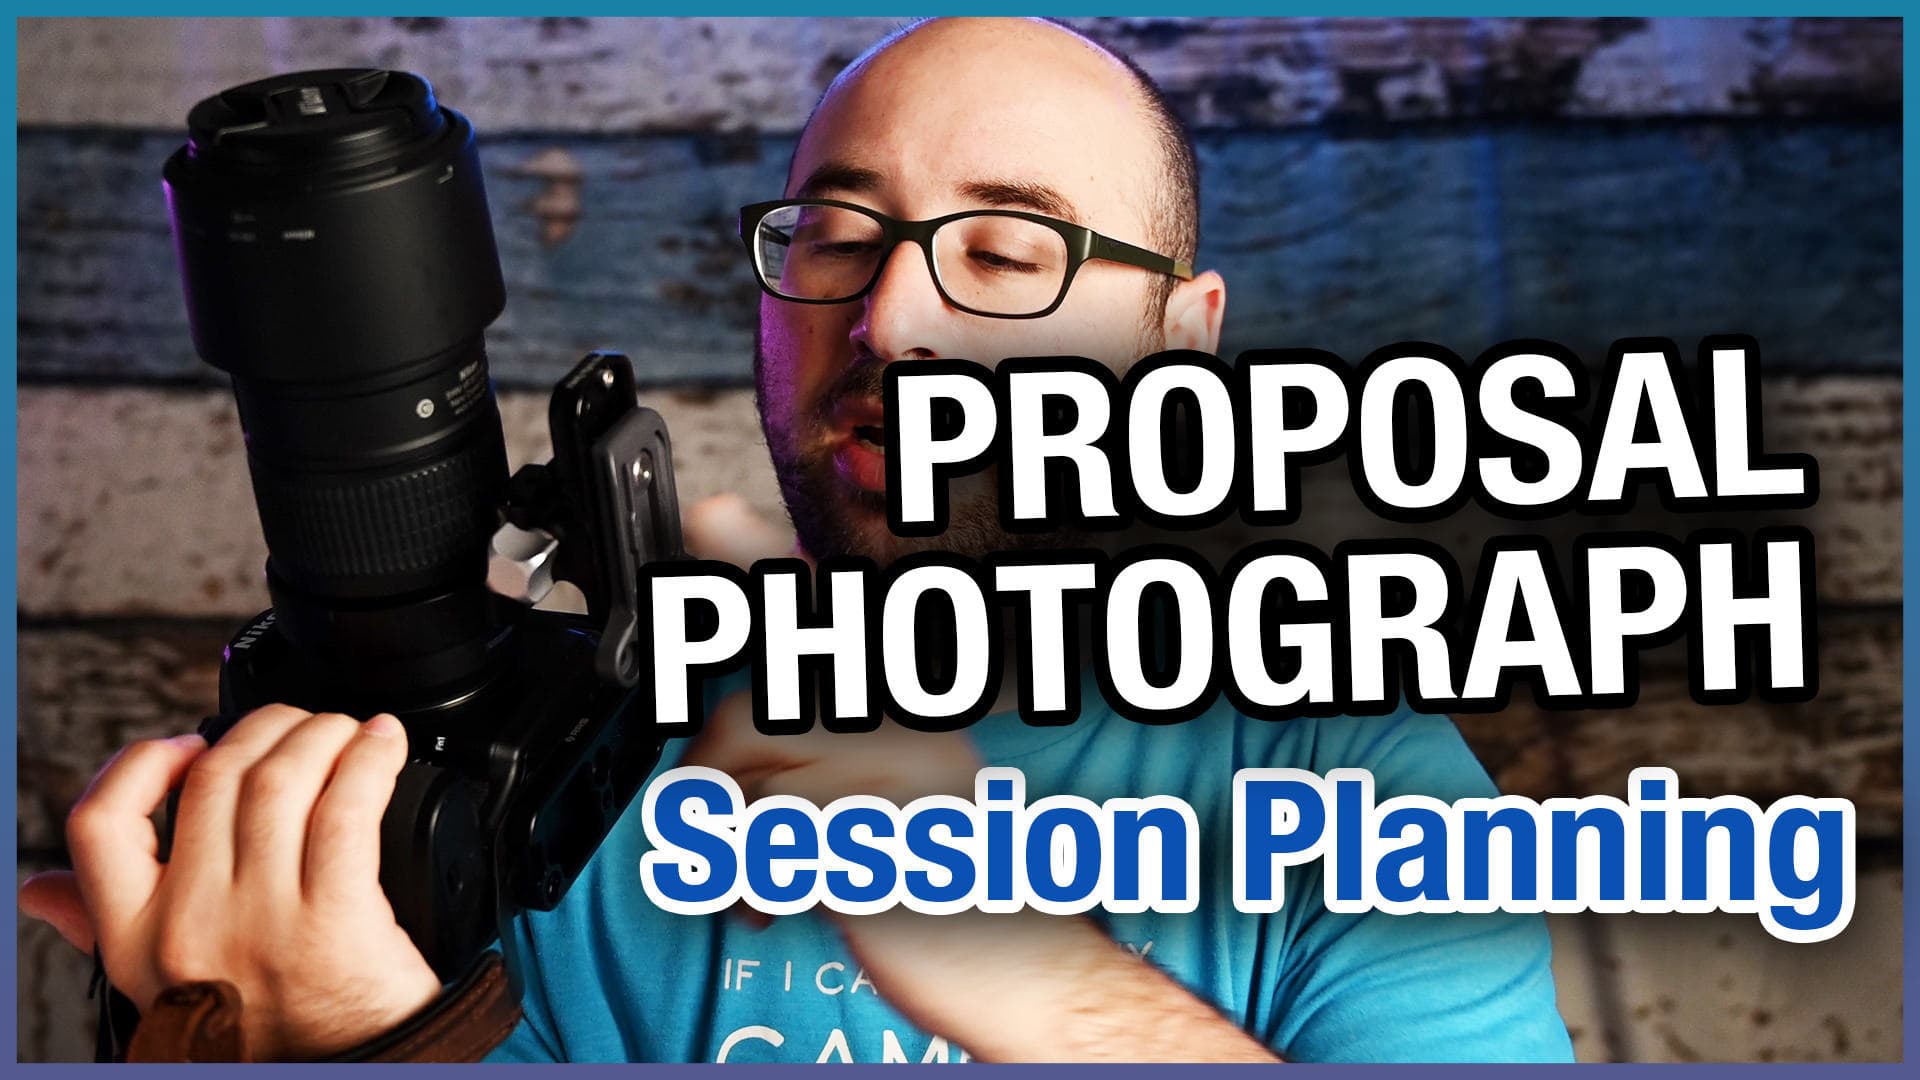 Proposal Photography - How I Planned a Proposal Photo Session